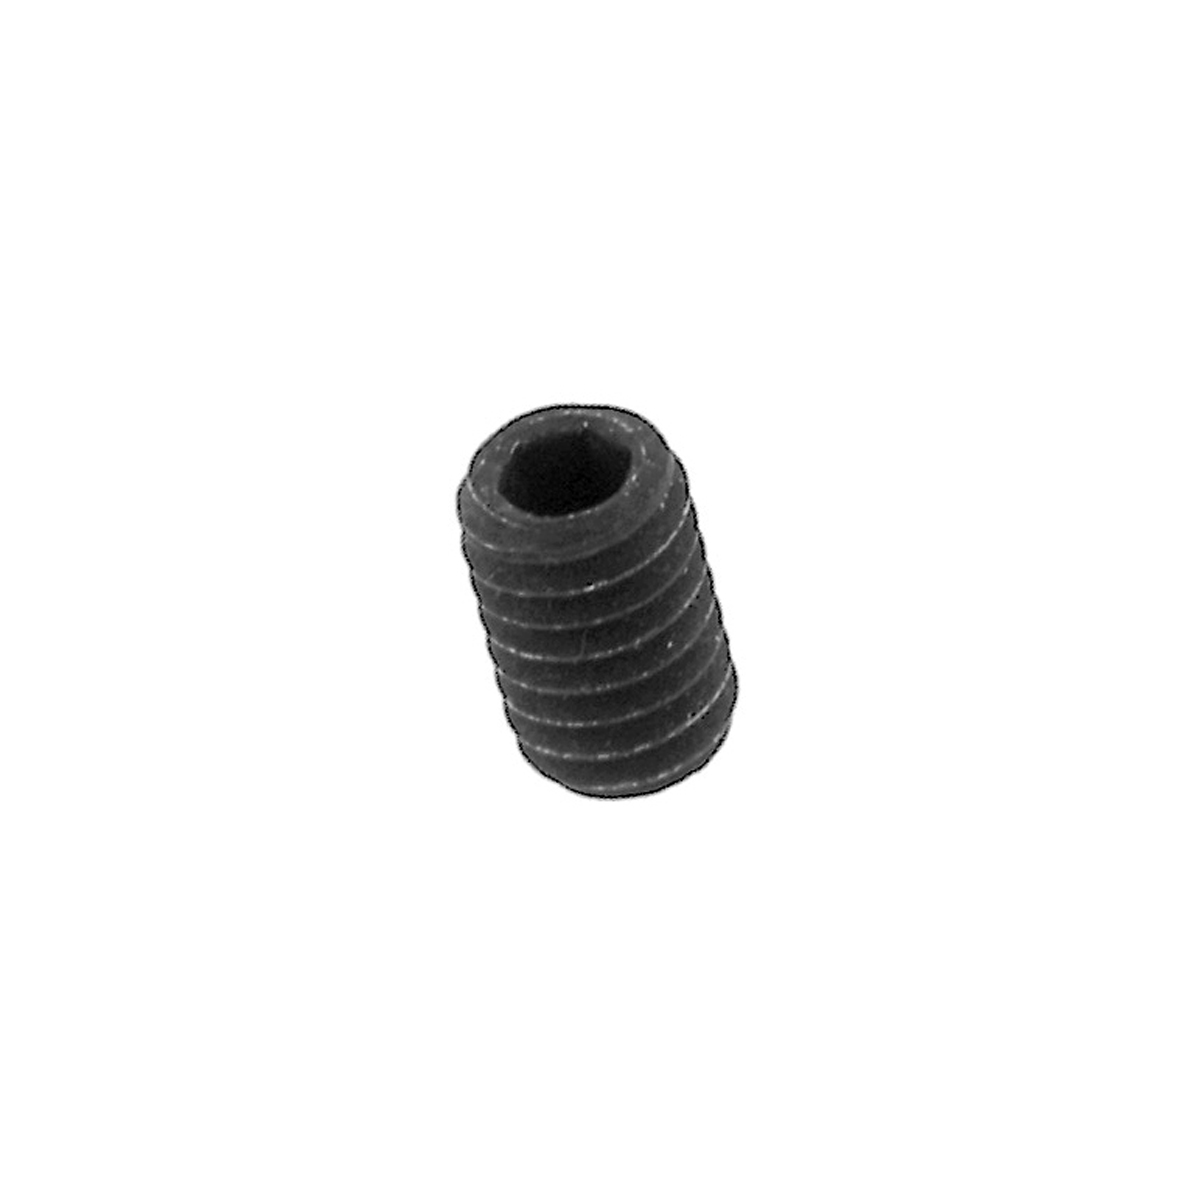 Cone Point Set Screw for Hobart Mixers OEM # 7744